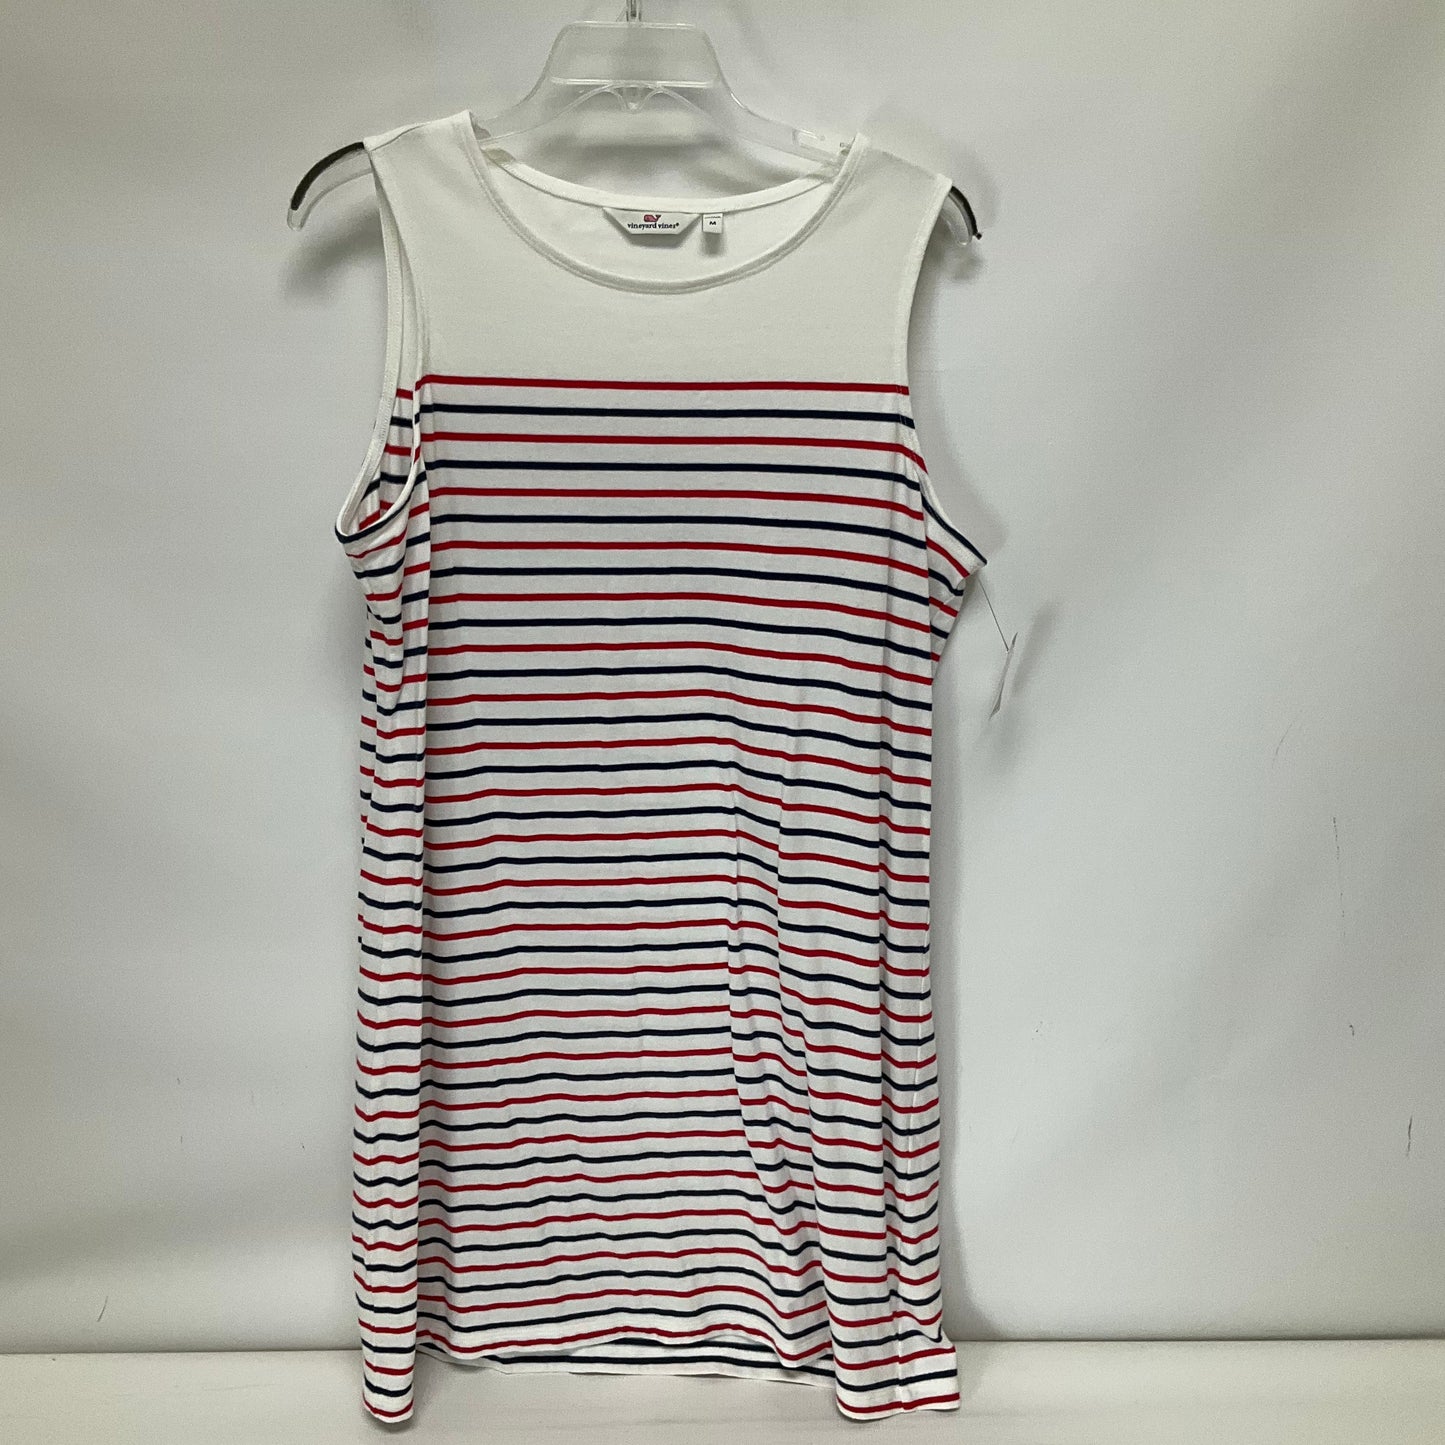 Blue & Red & White Dress Casual Short Vineyard Vines, Size M